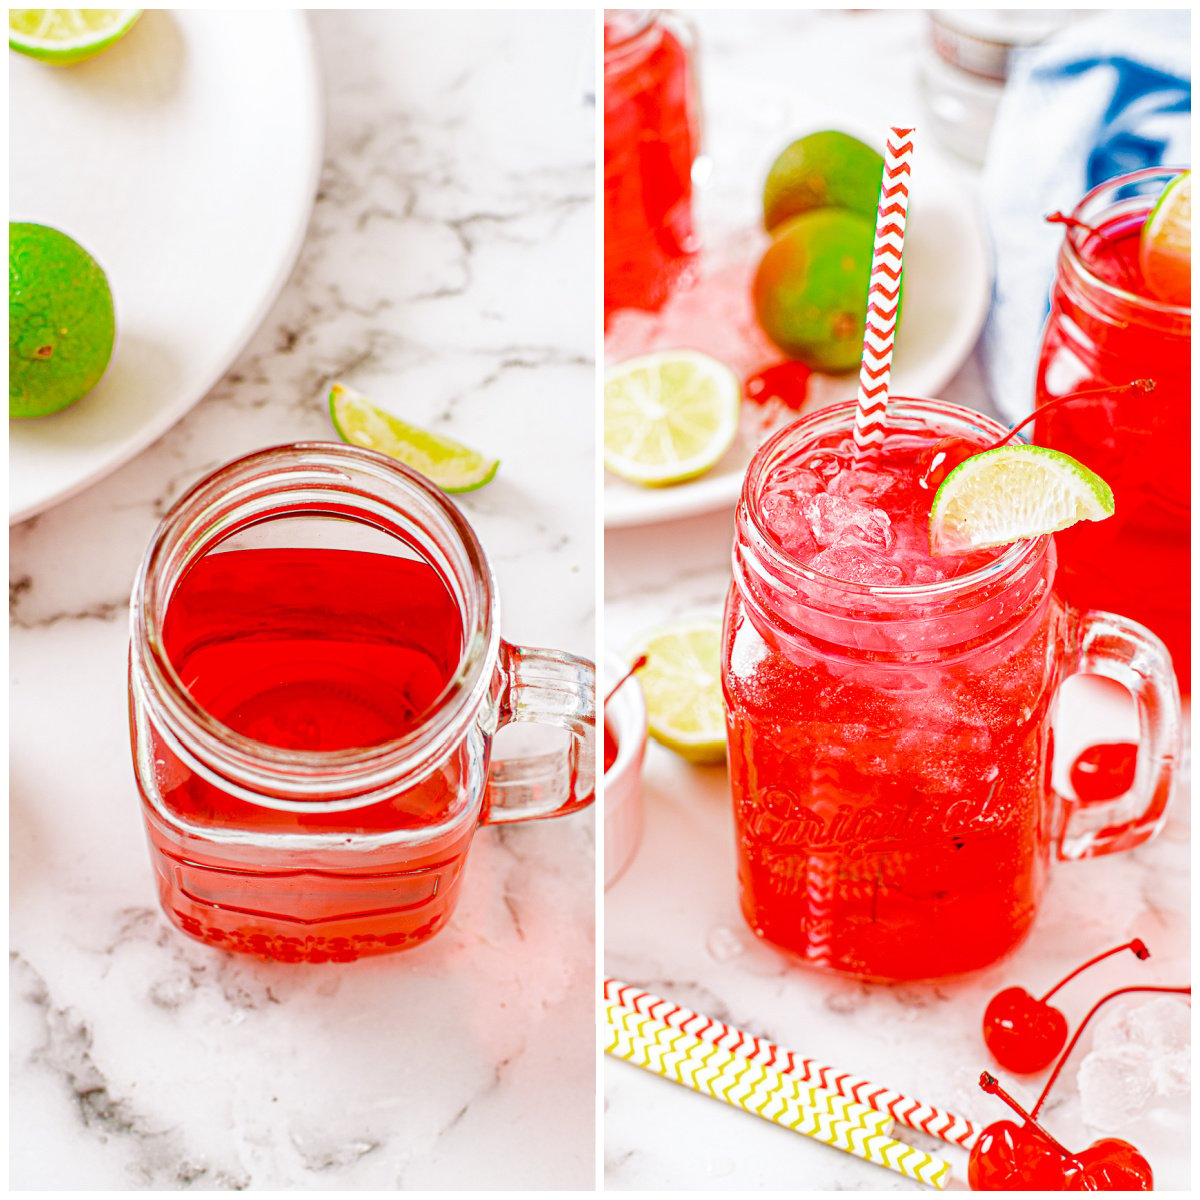 Step by step photos on how to make a Cherry Limeade Cocktail.